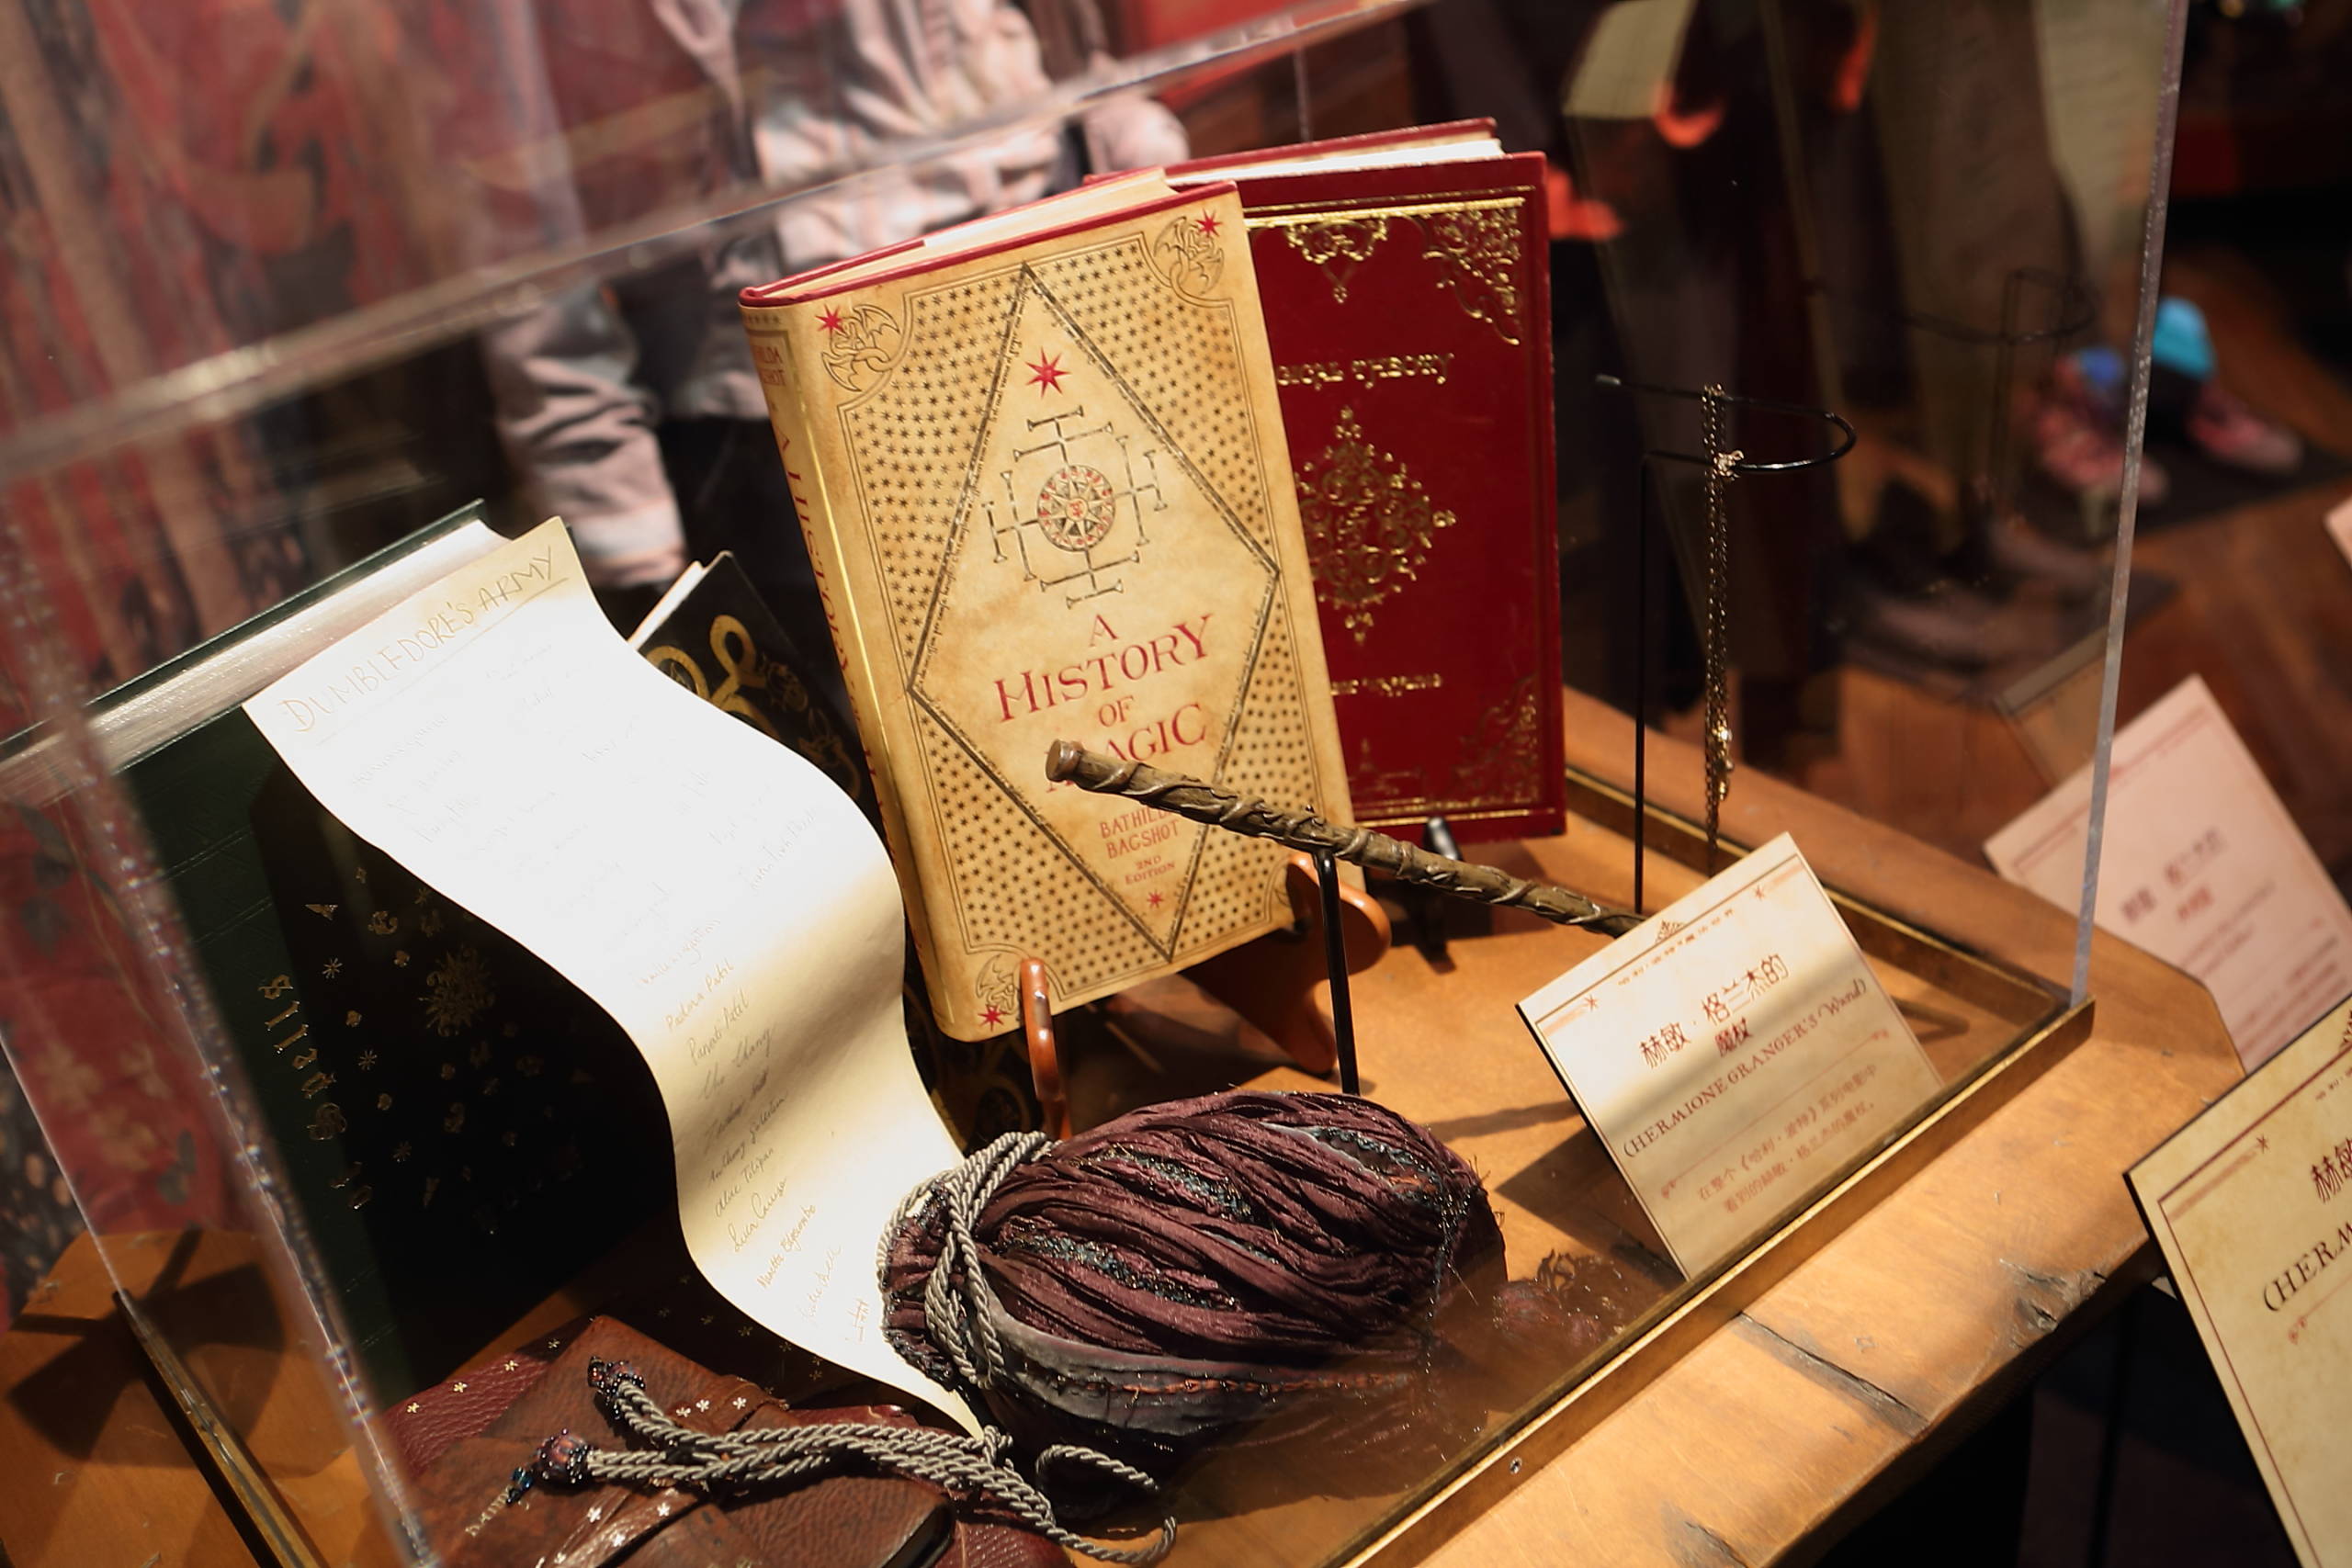 HP exhibition History of Magic book